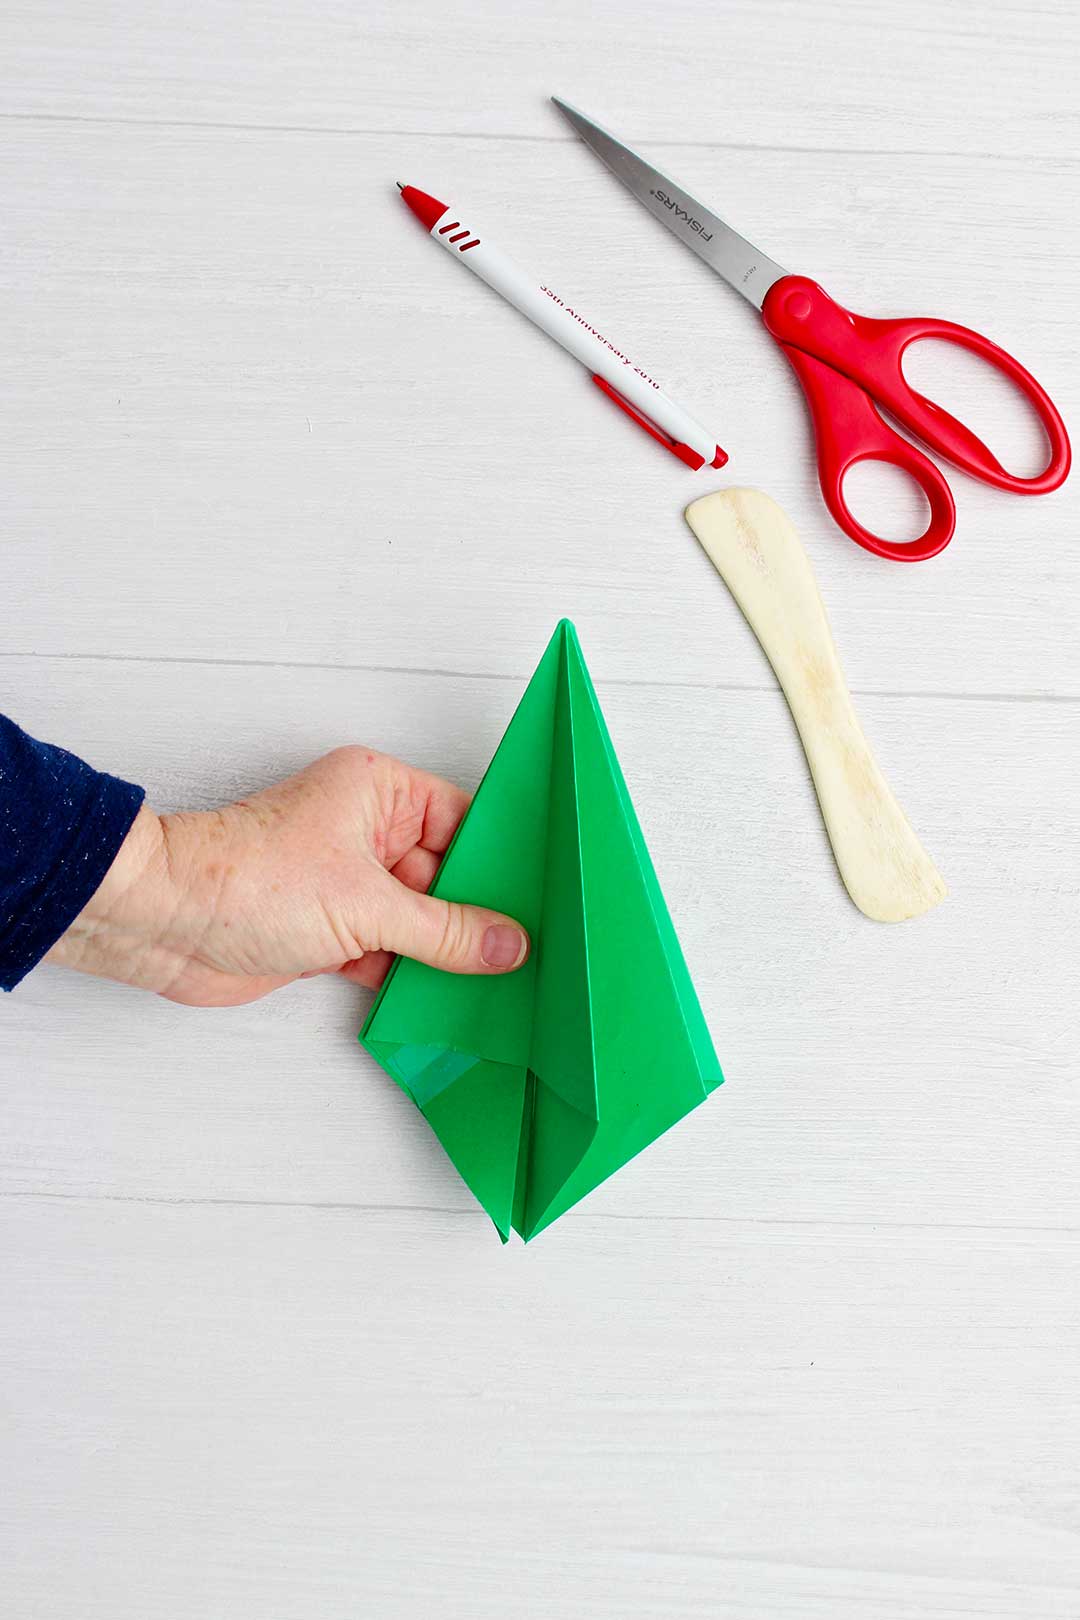 Hand holding green origami tree after folding in corner pieces.